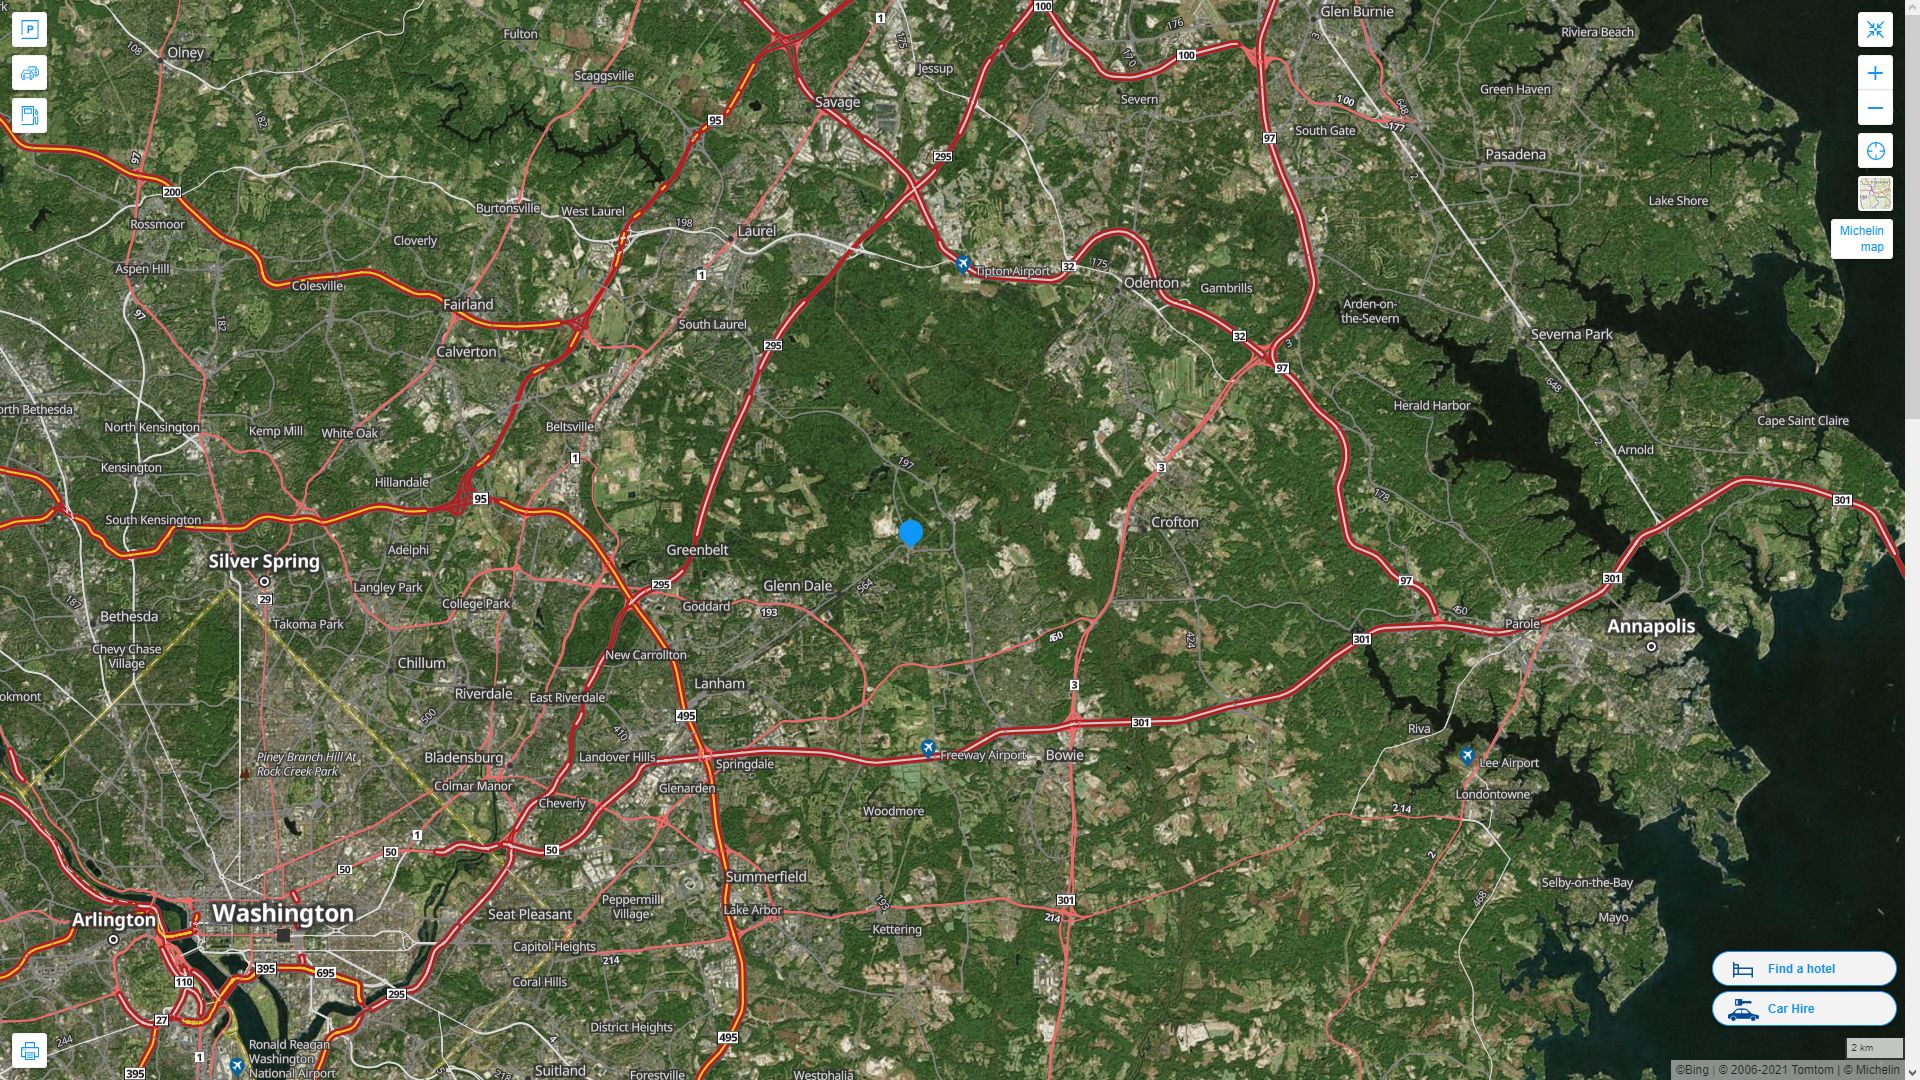 Bowie Maryland Highway and Road Map with Satellite View